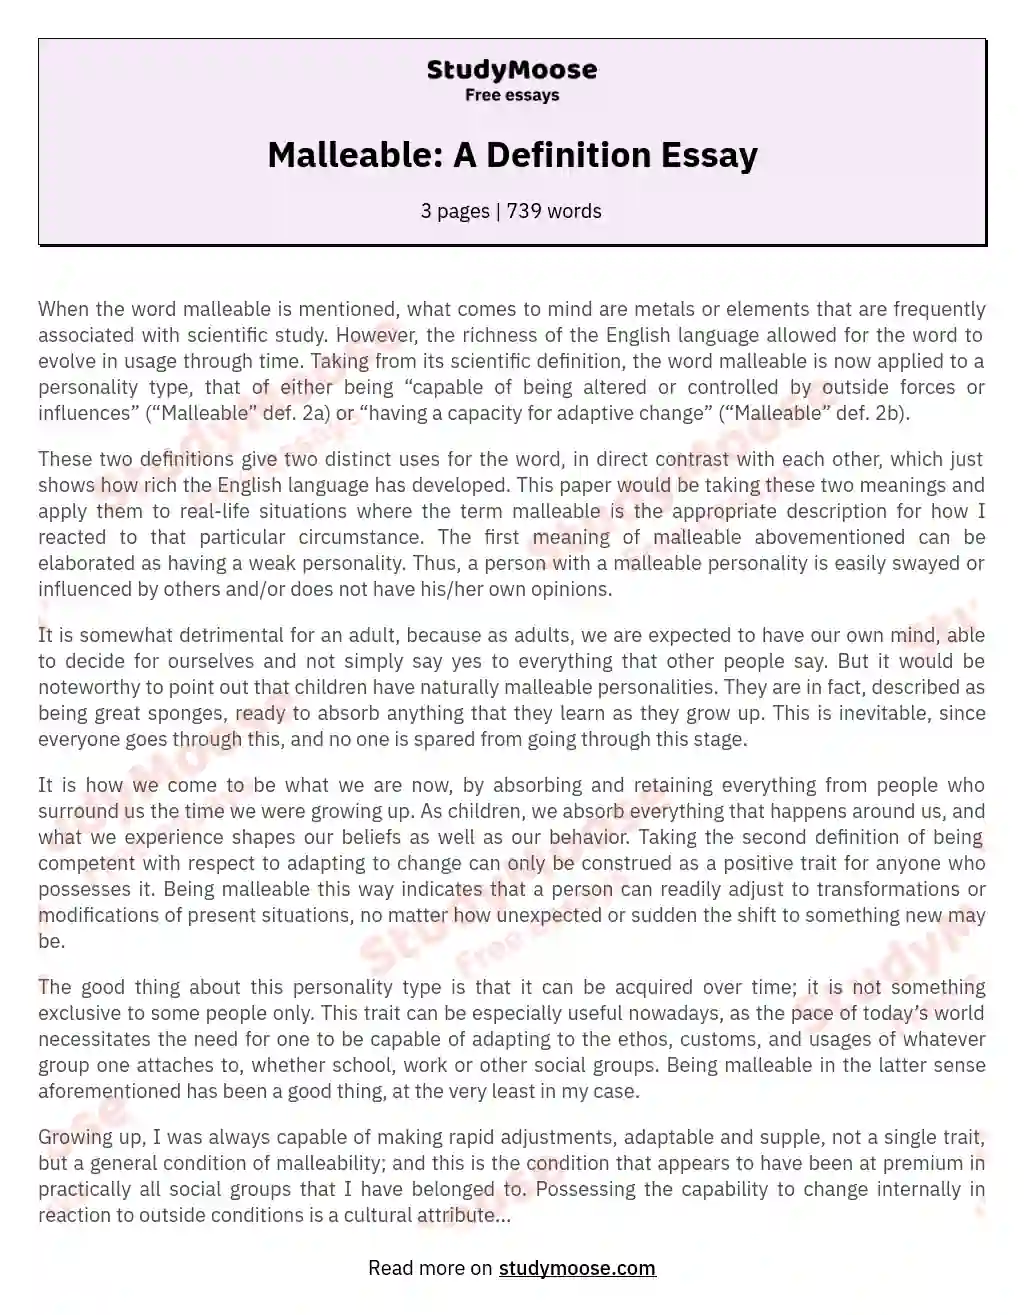 Malleable: A Definition Essay